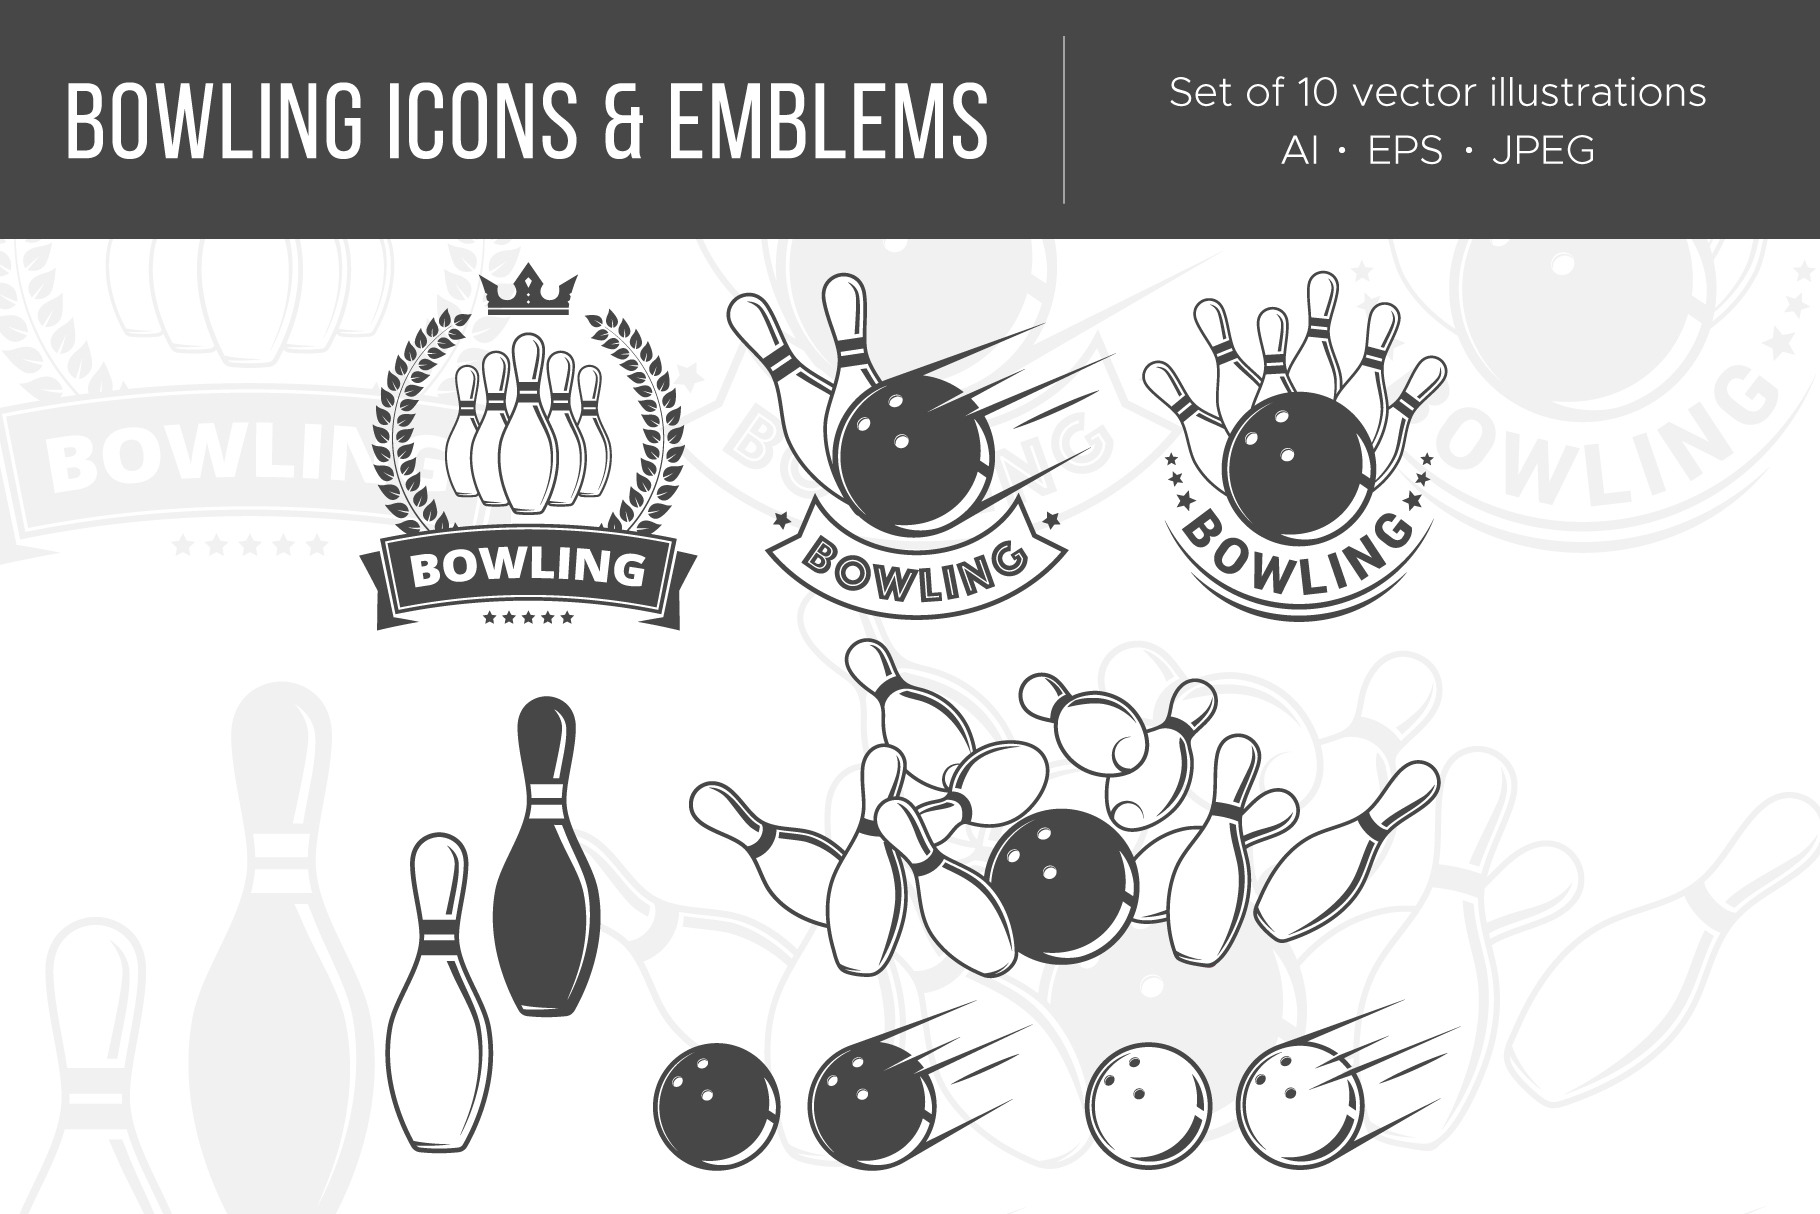 Bowling objects and emblems, an Object Illustration by Cmeree